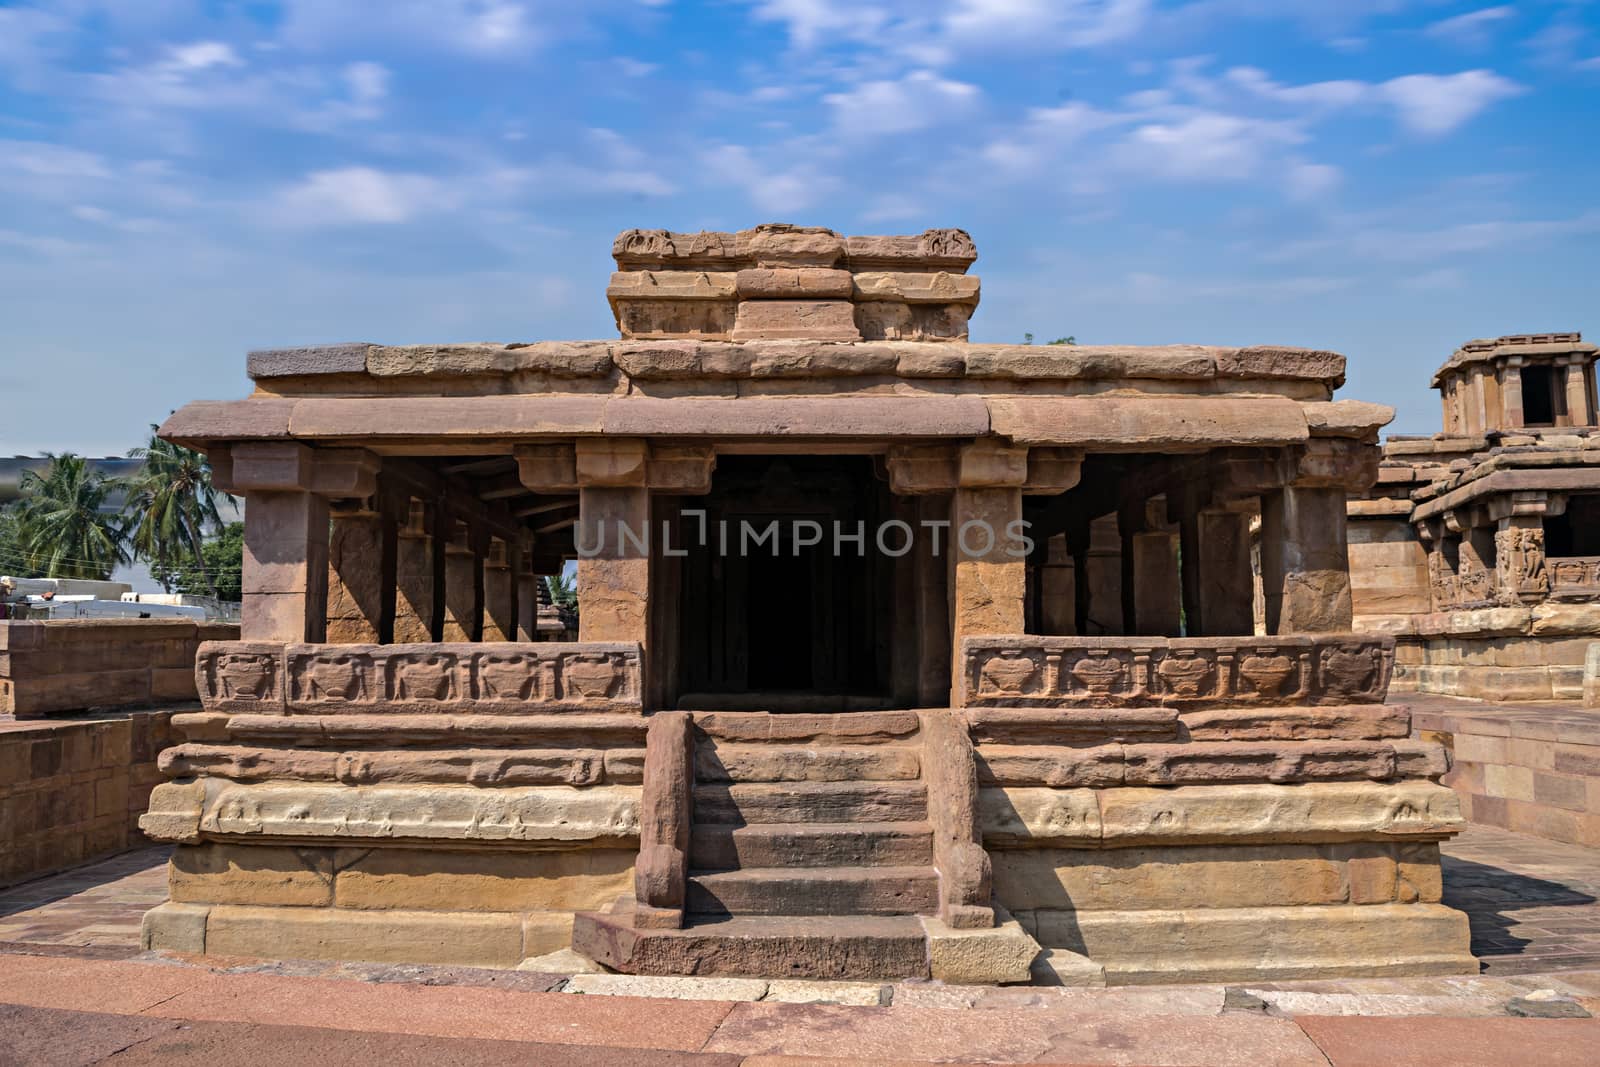 Ancient 8th century carved stone temple of Aihole, Karnataka, India. The exquisite sculpted monument has been excavated. by lalam